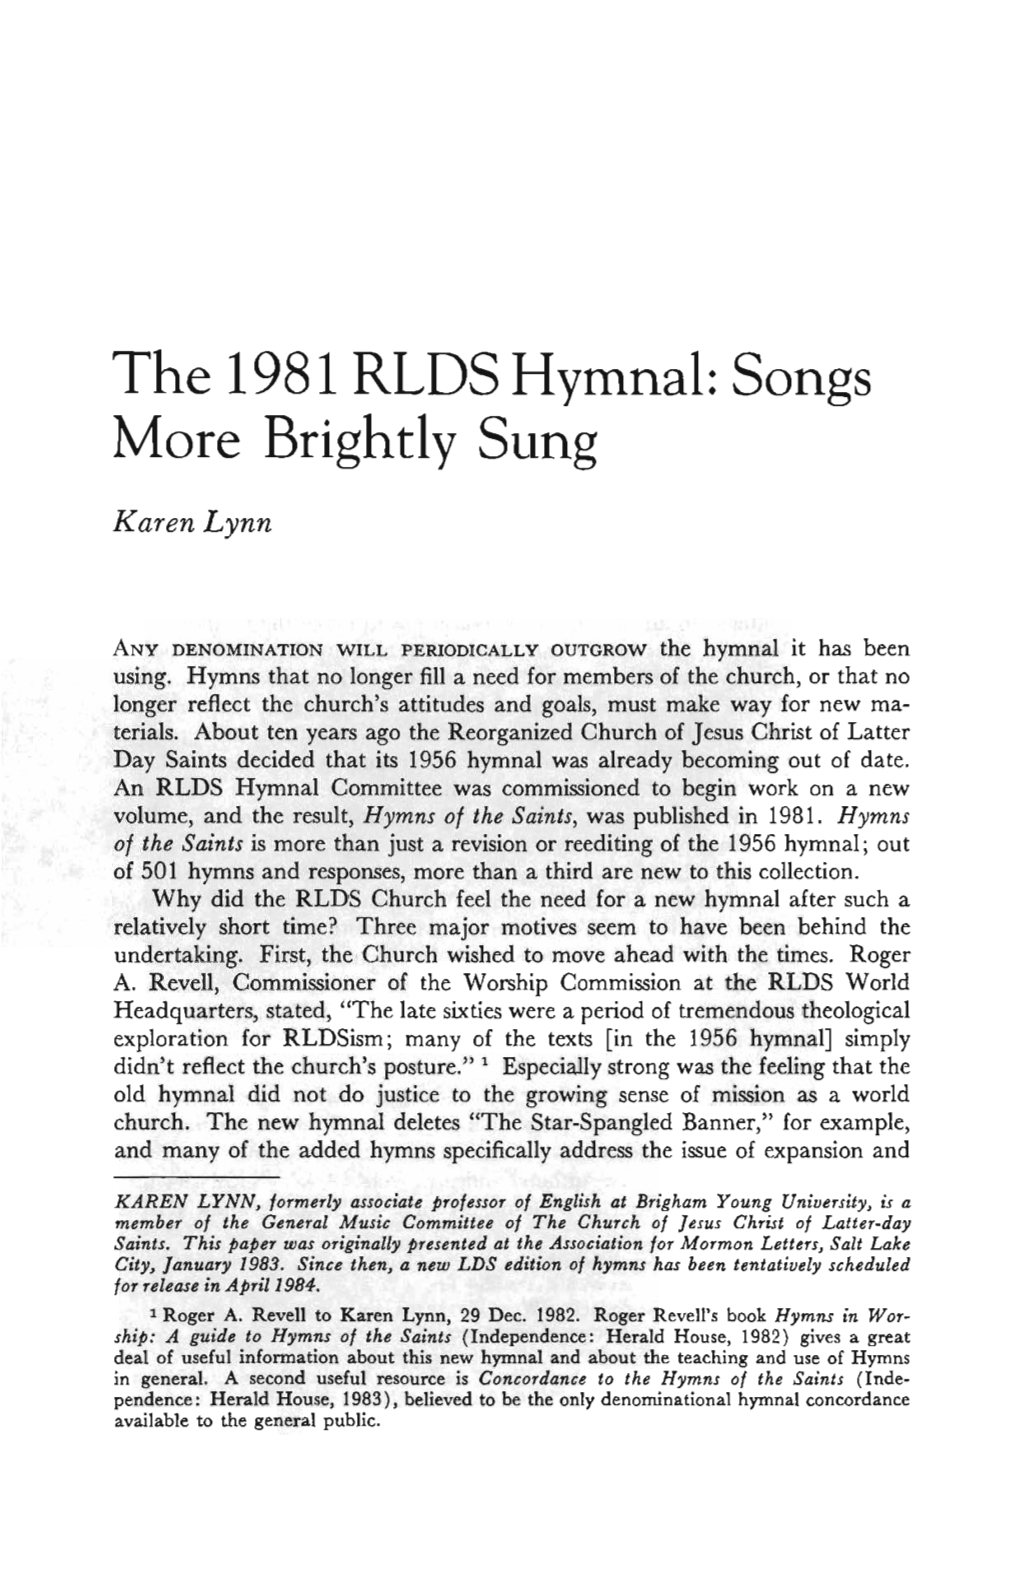 The 1981 RLDS Hymnal: Songs More Brightly Sung